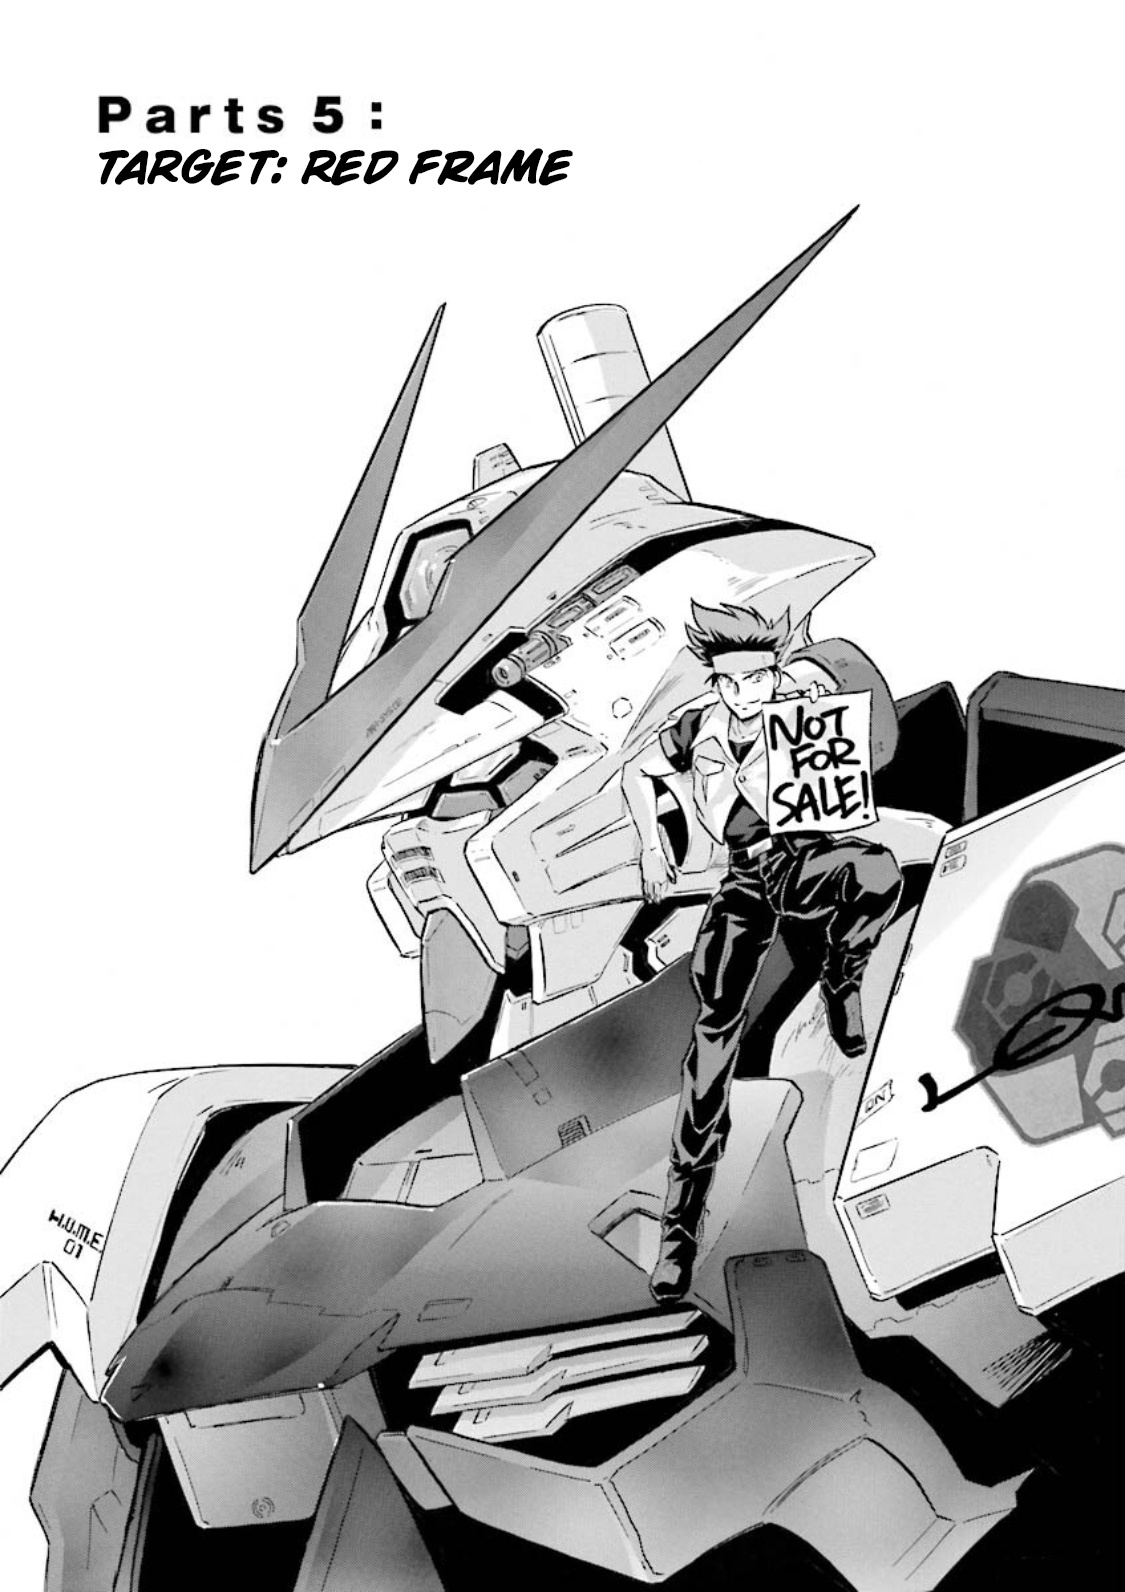 Mobile Suit Gundam Seed Astray Re:master Edition Vol.1 Chapter 5: Target: Red Frame - Picture 1